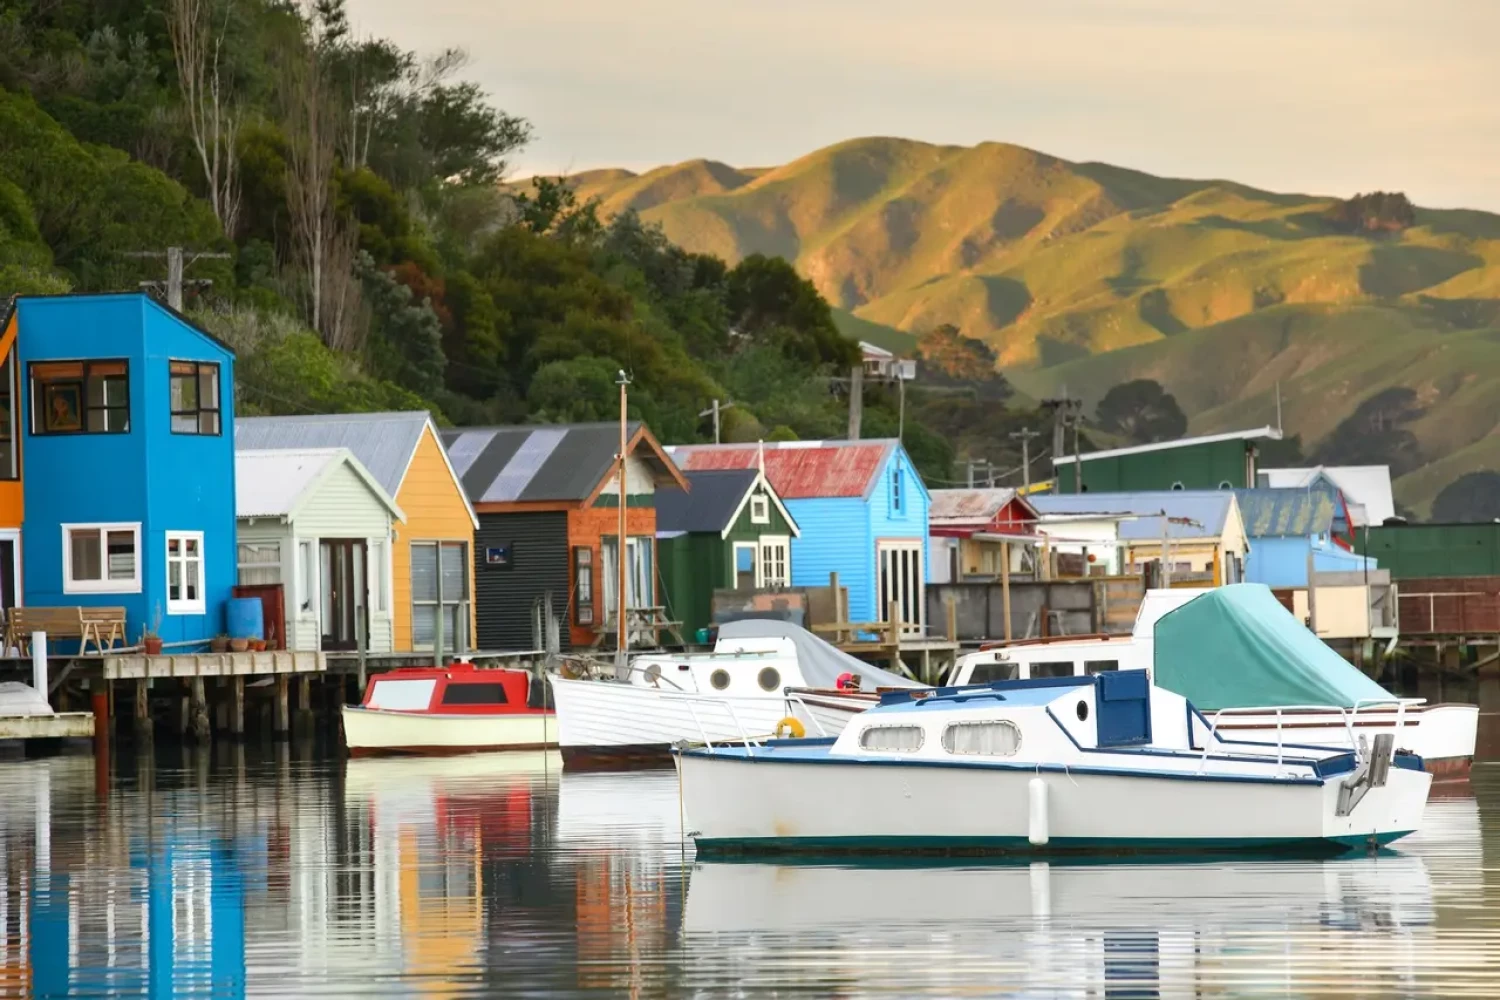 scenic paremata porirua boat sheds credit rob suisted naturespic.com water ocean harbour hills views nature colour